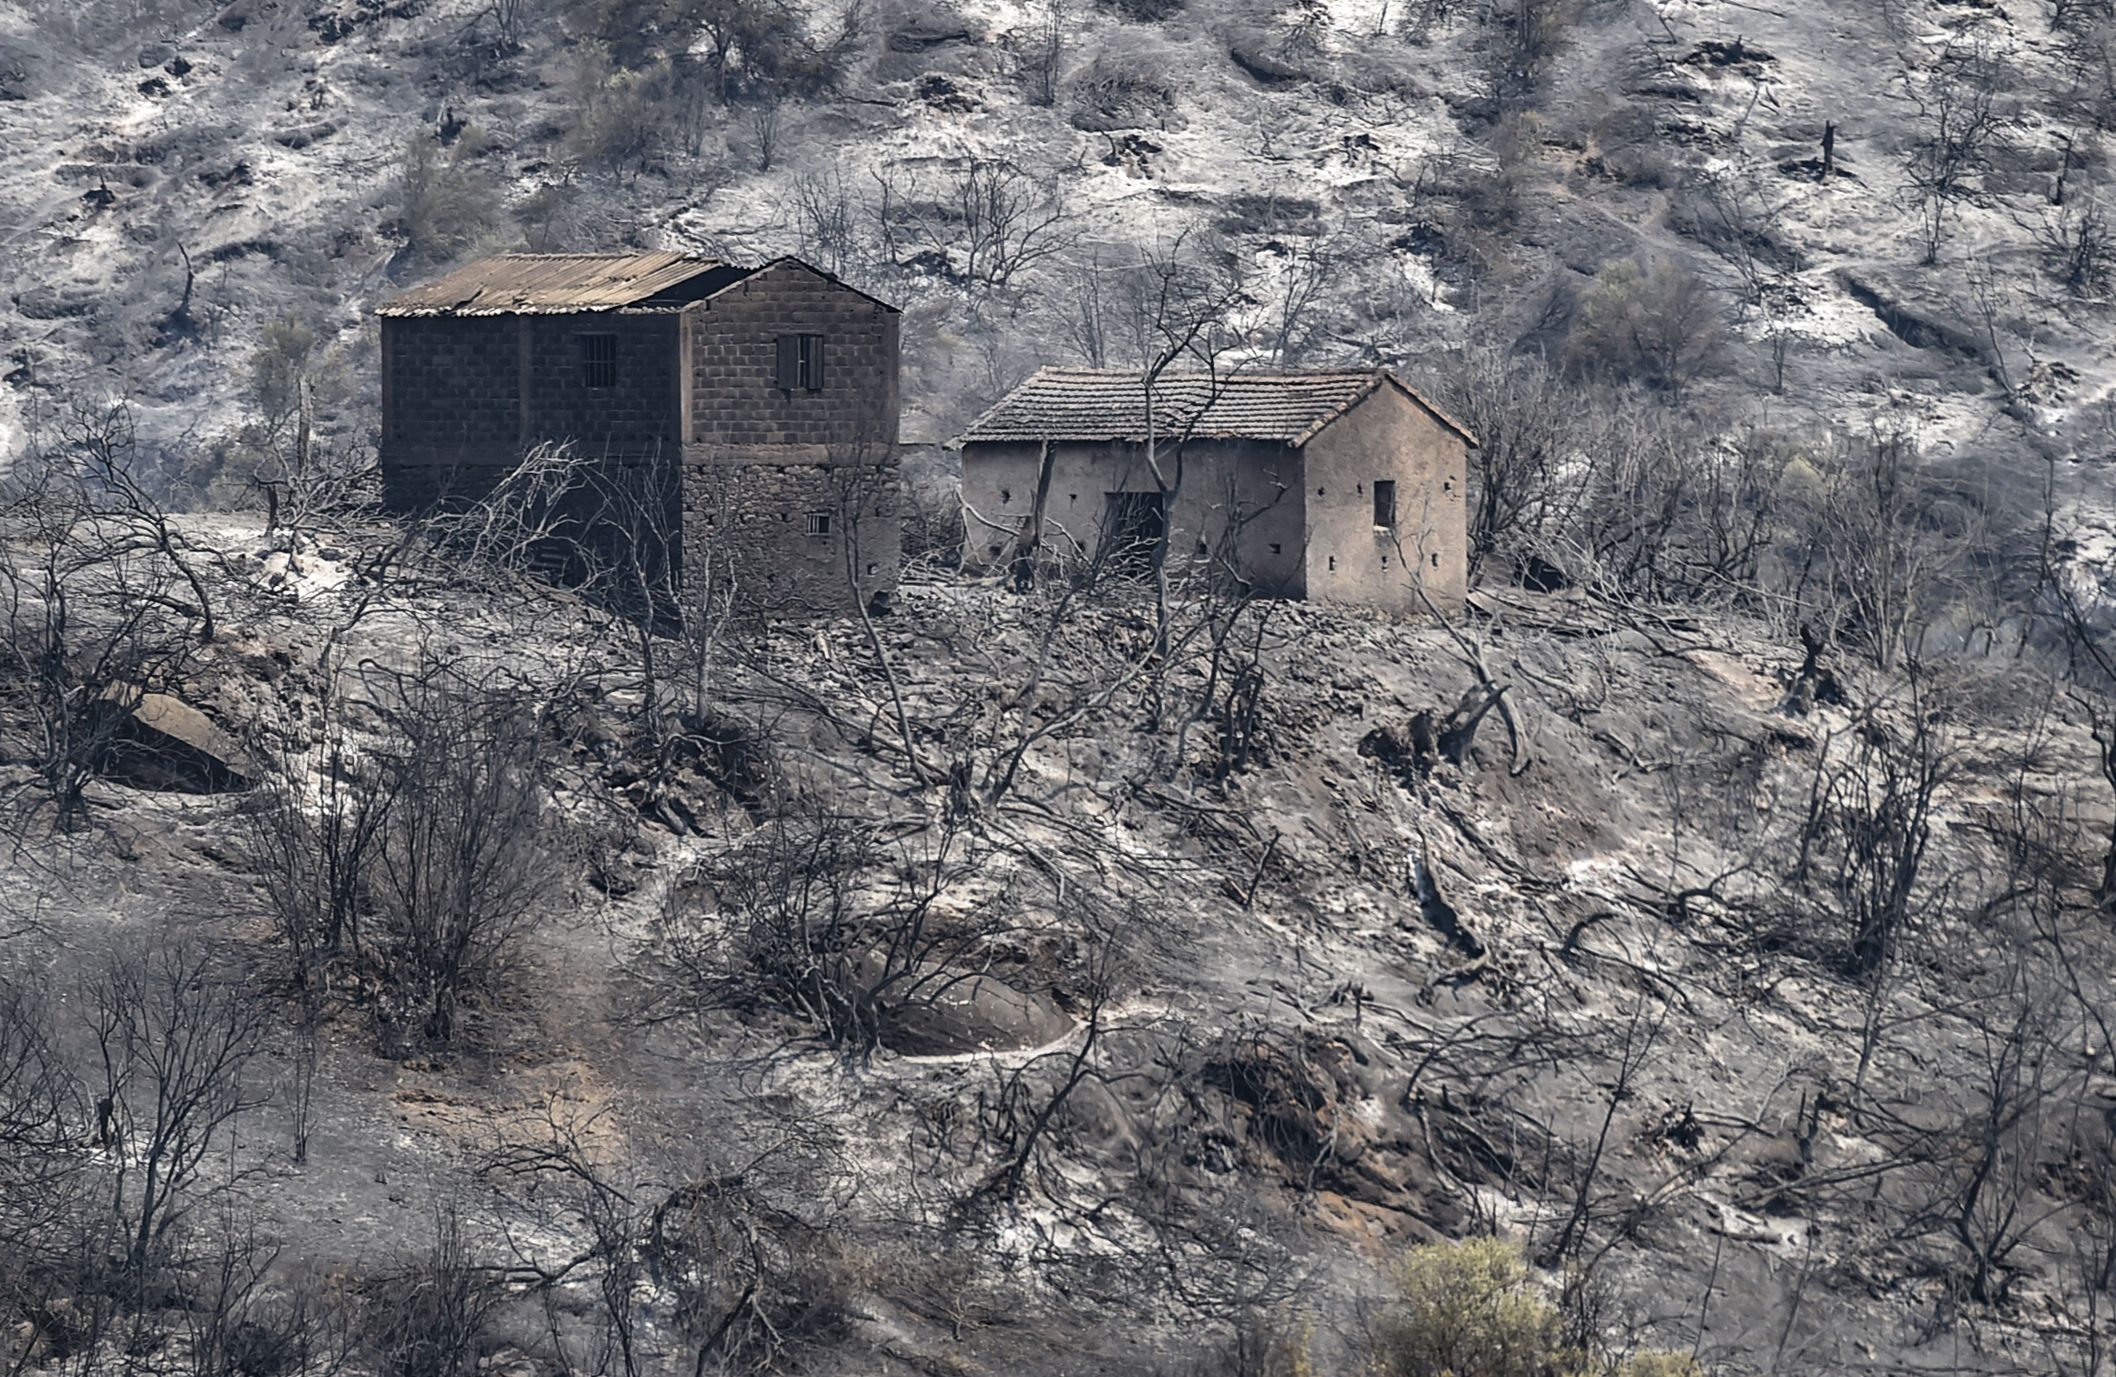 Burned houses stand amidst charred trees, following a wildfire in the forested hills of the Kabylie region, east of the Algerian capital Algiers, on August 11, 2021.